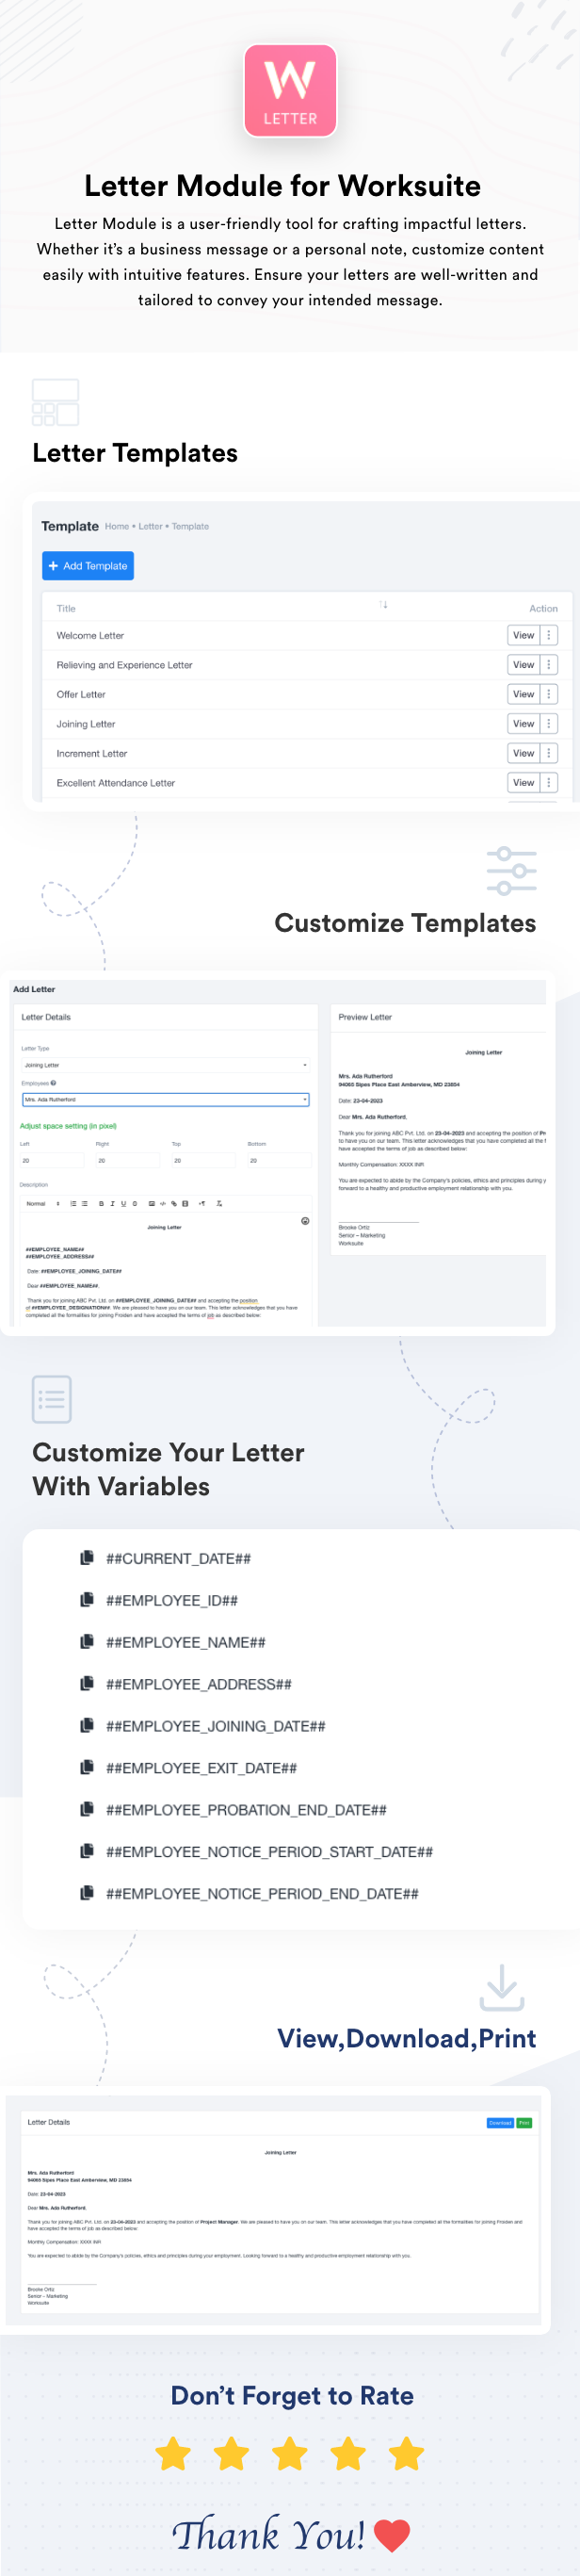 Letter Module for Worksuite CRM - 1